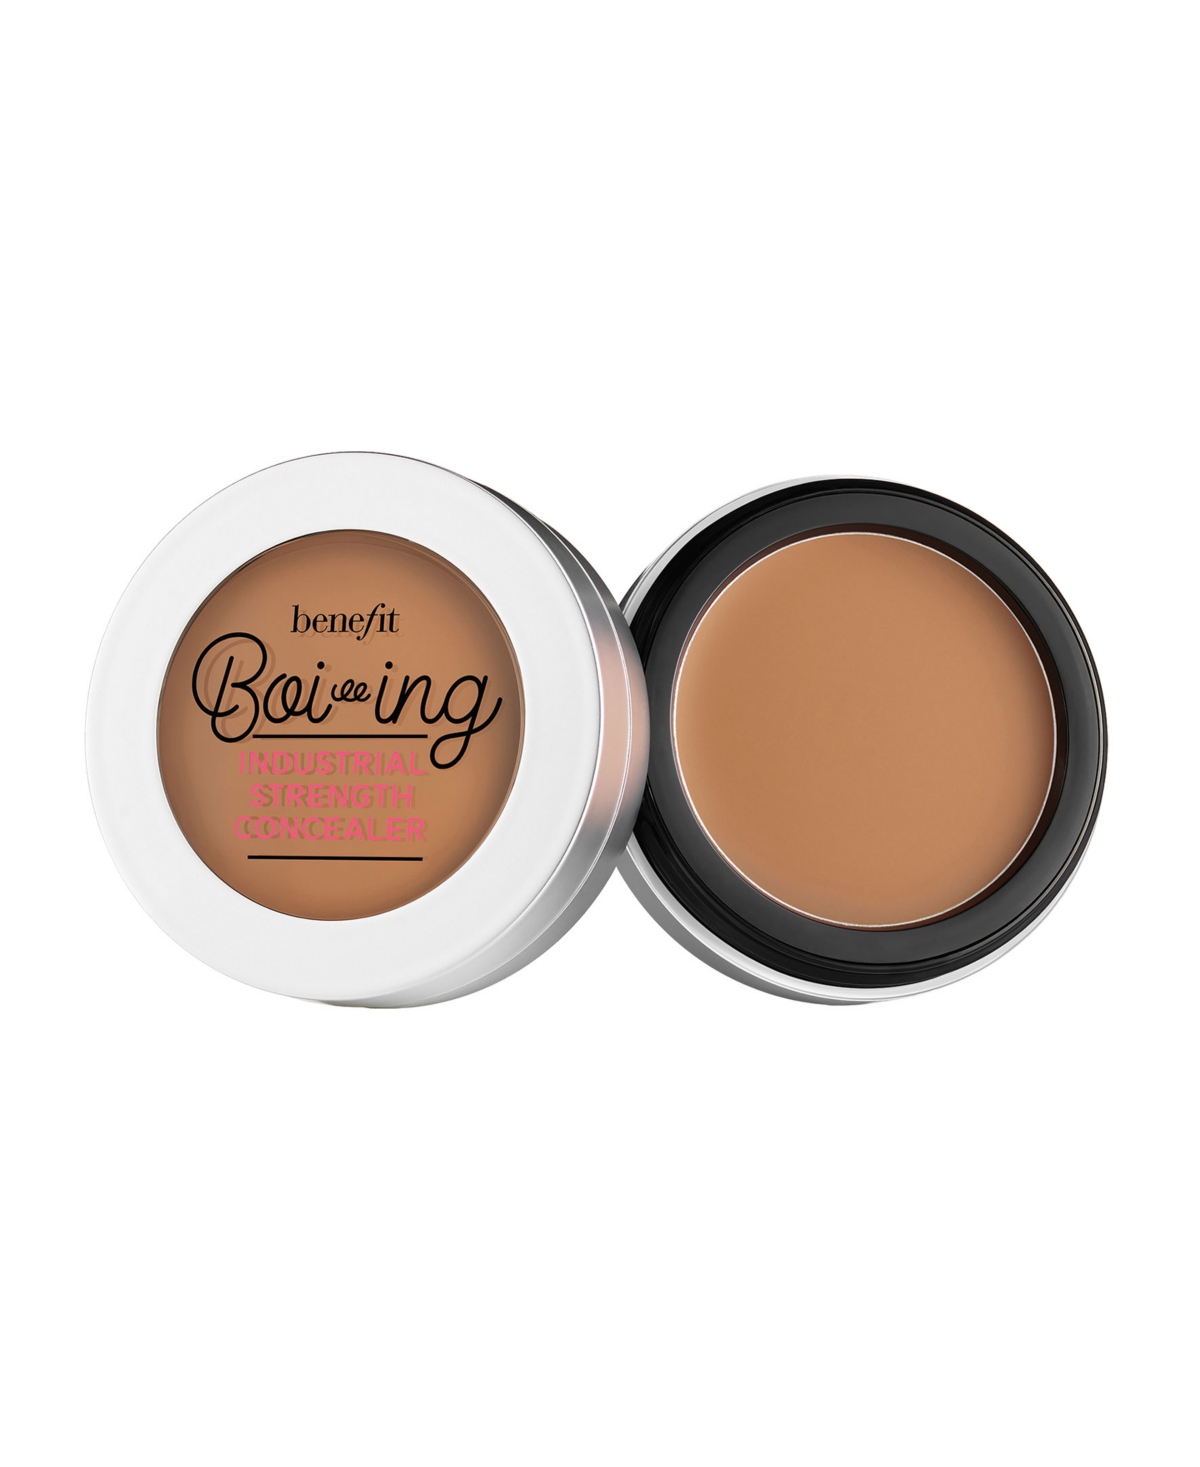 Benefit Cosmetics Boi-ing Industrial-strength Concealer In Shade  - Tan Warm